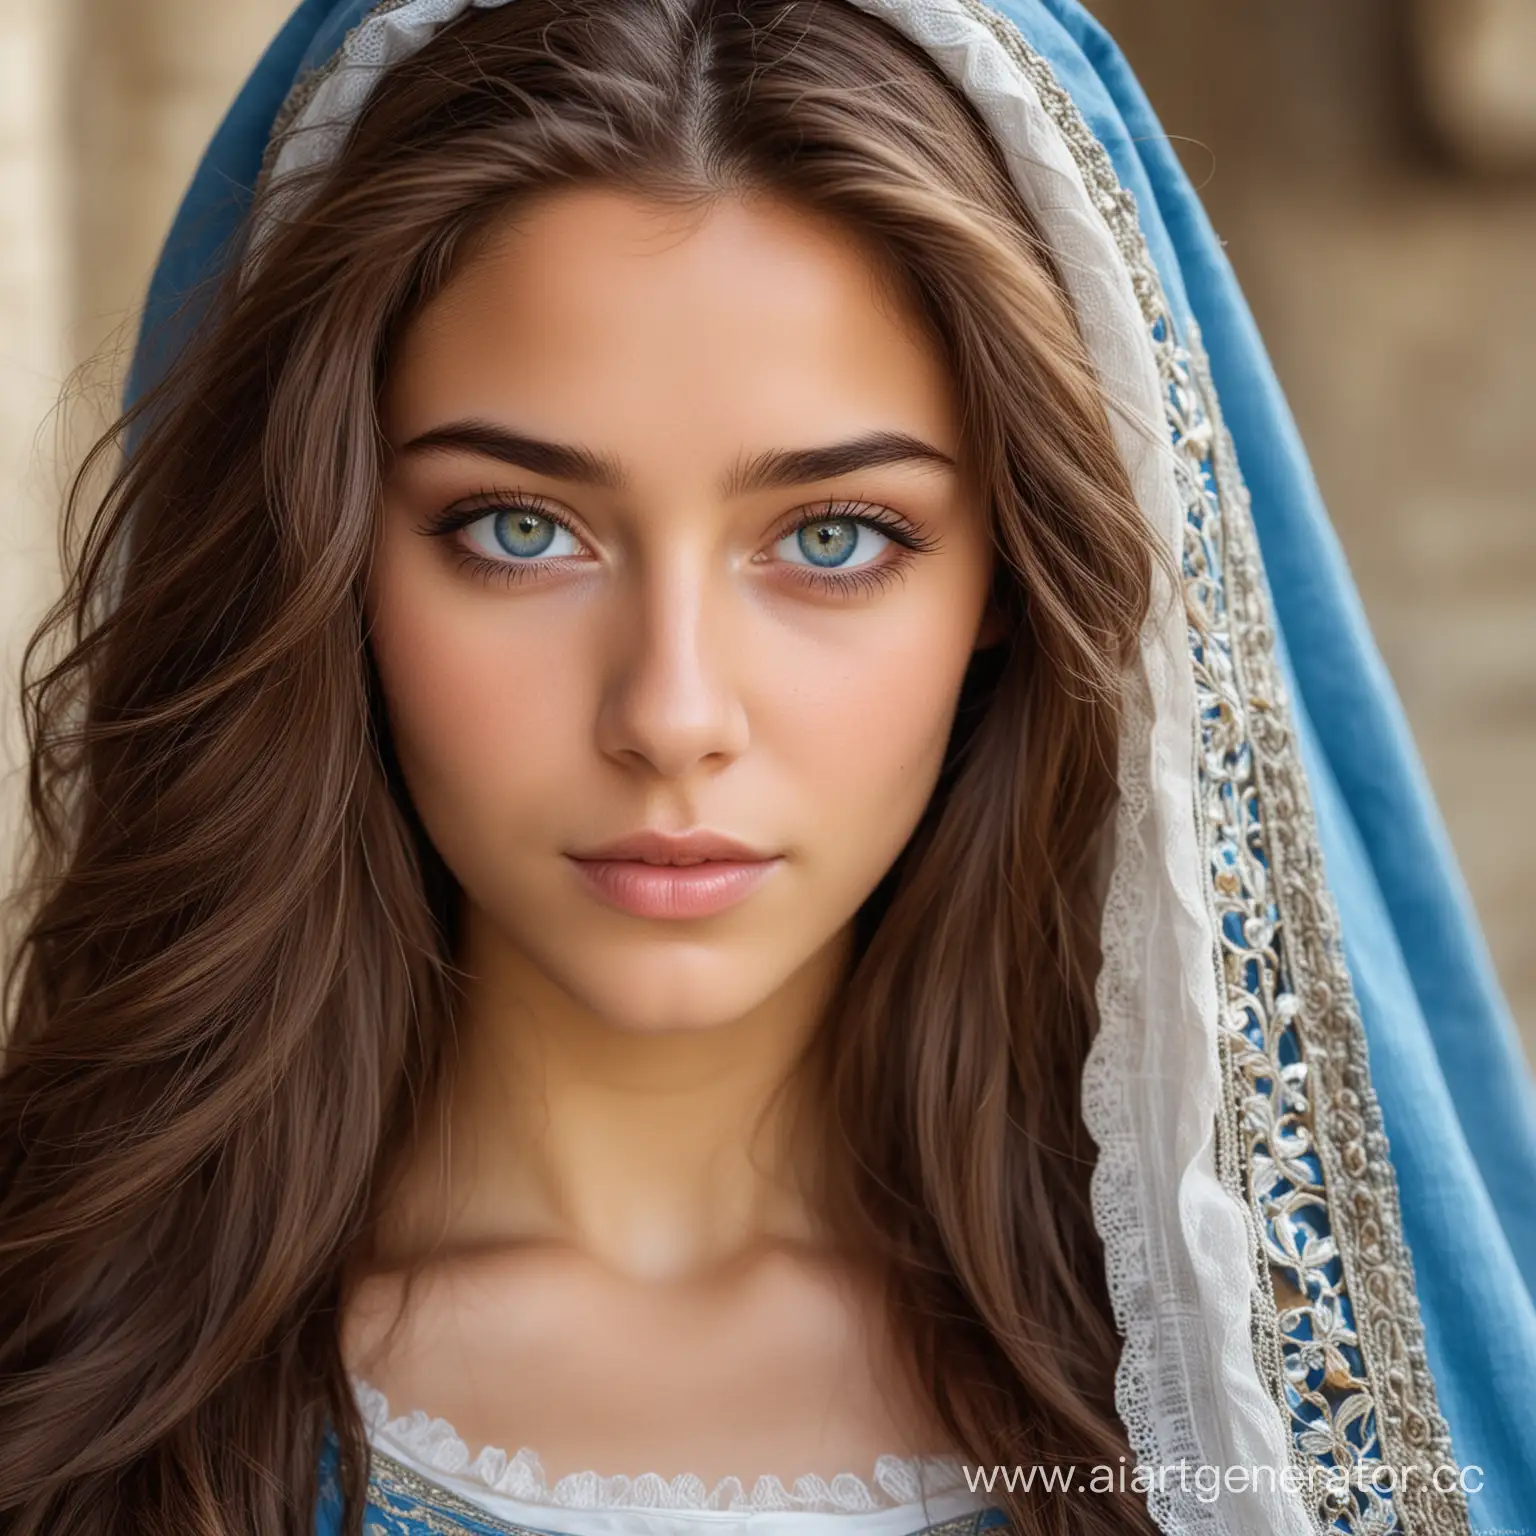  a woman who is 20 years old, with brown skin, beautiful long brown hair, very pretty, the iris of her eyes are blue and the whites of her eyes are a light tint of blue, in the medieval time period